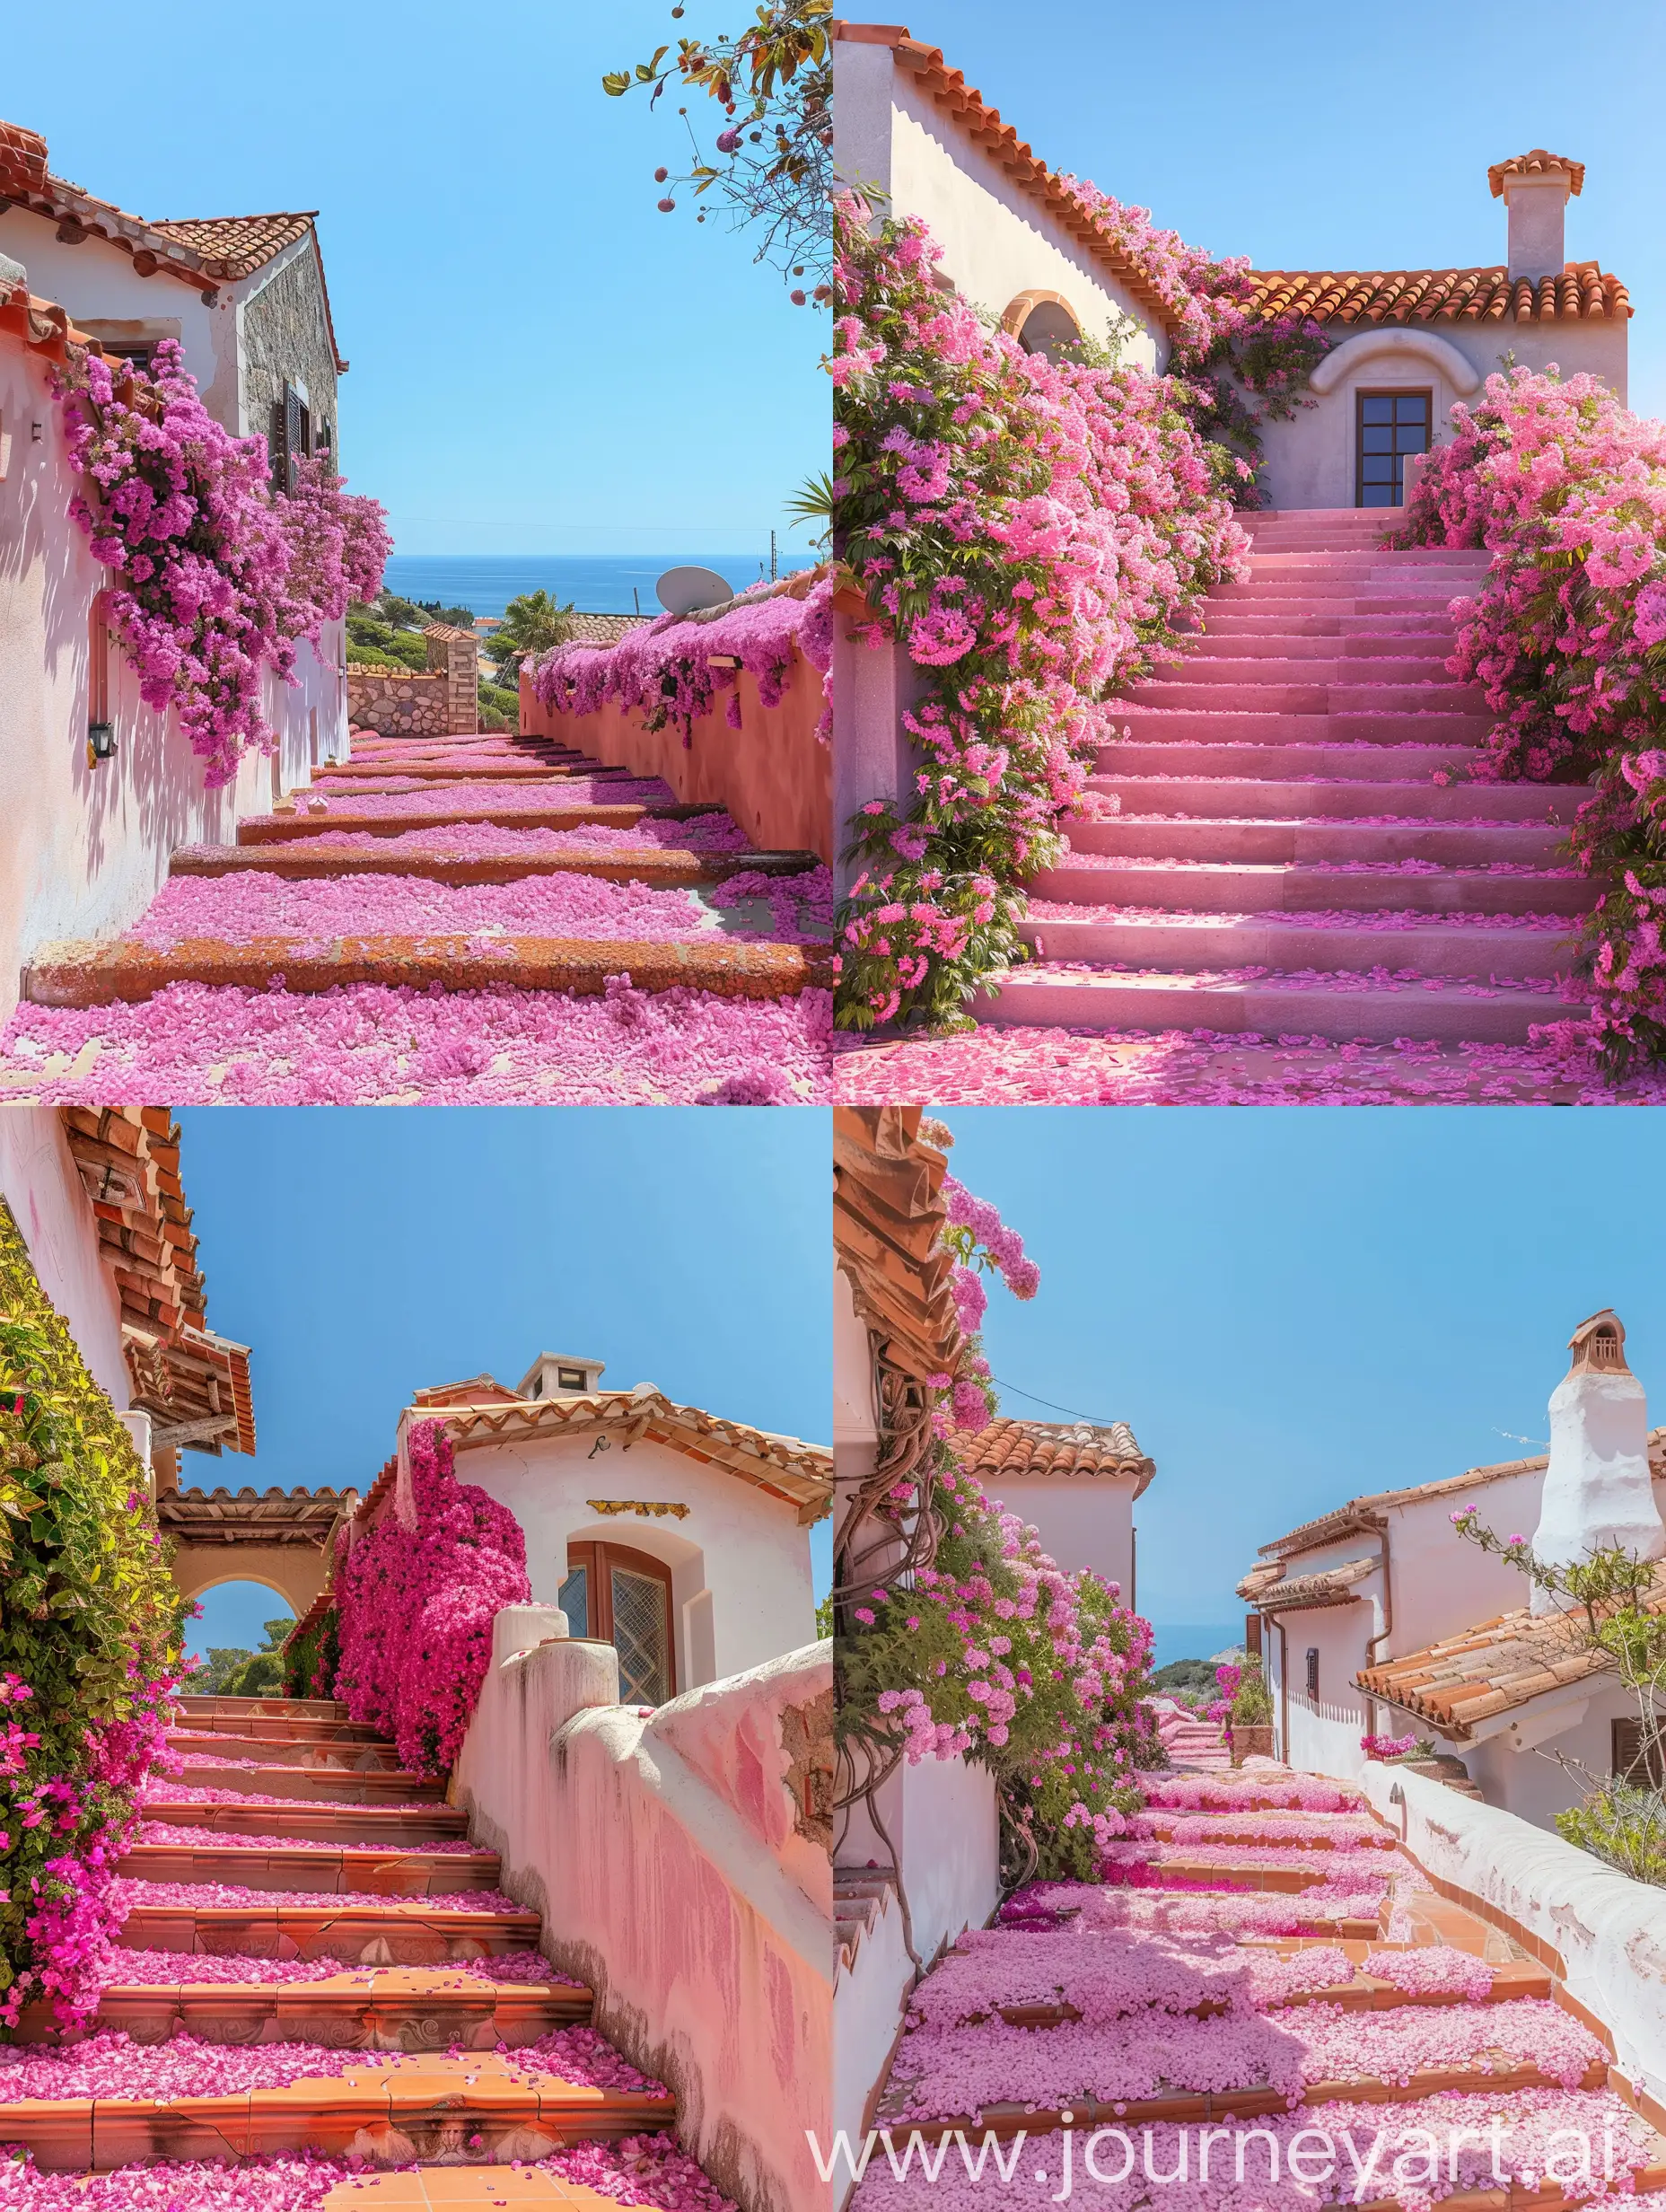 A pink flower-covered staircase leading to a classic Mediterranean style house with terracotta roof tiles, under a clear blue sky.